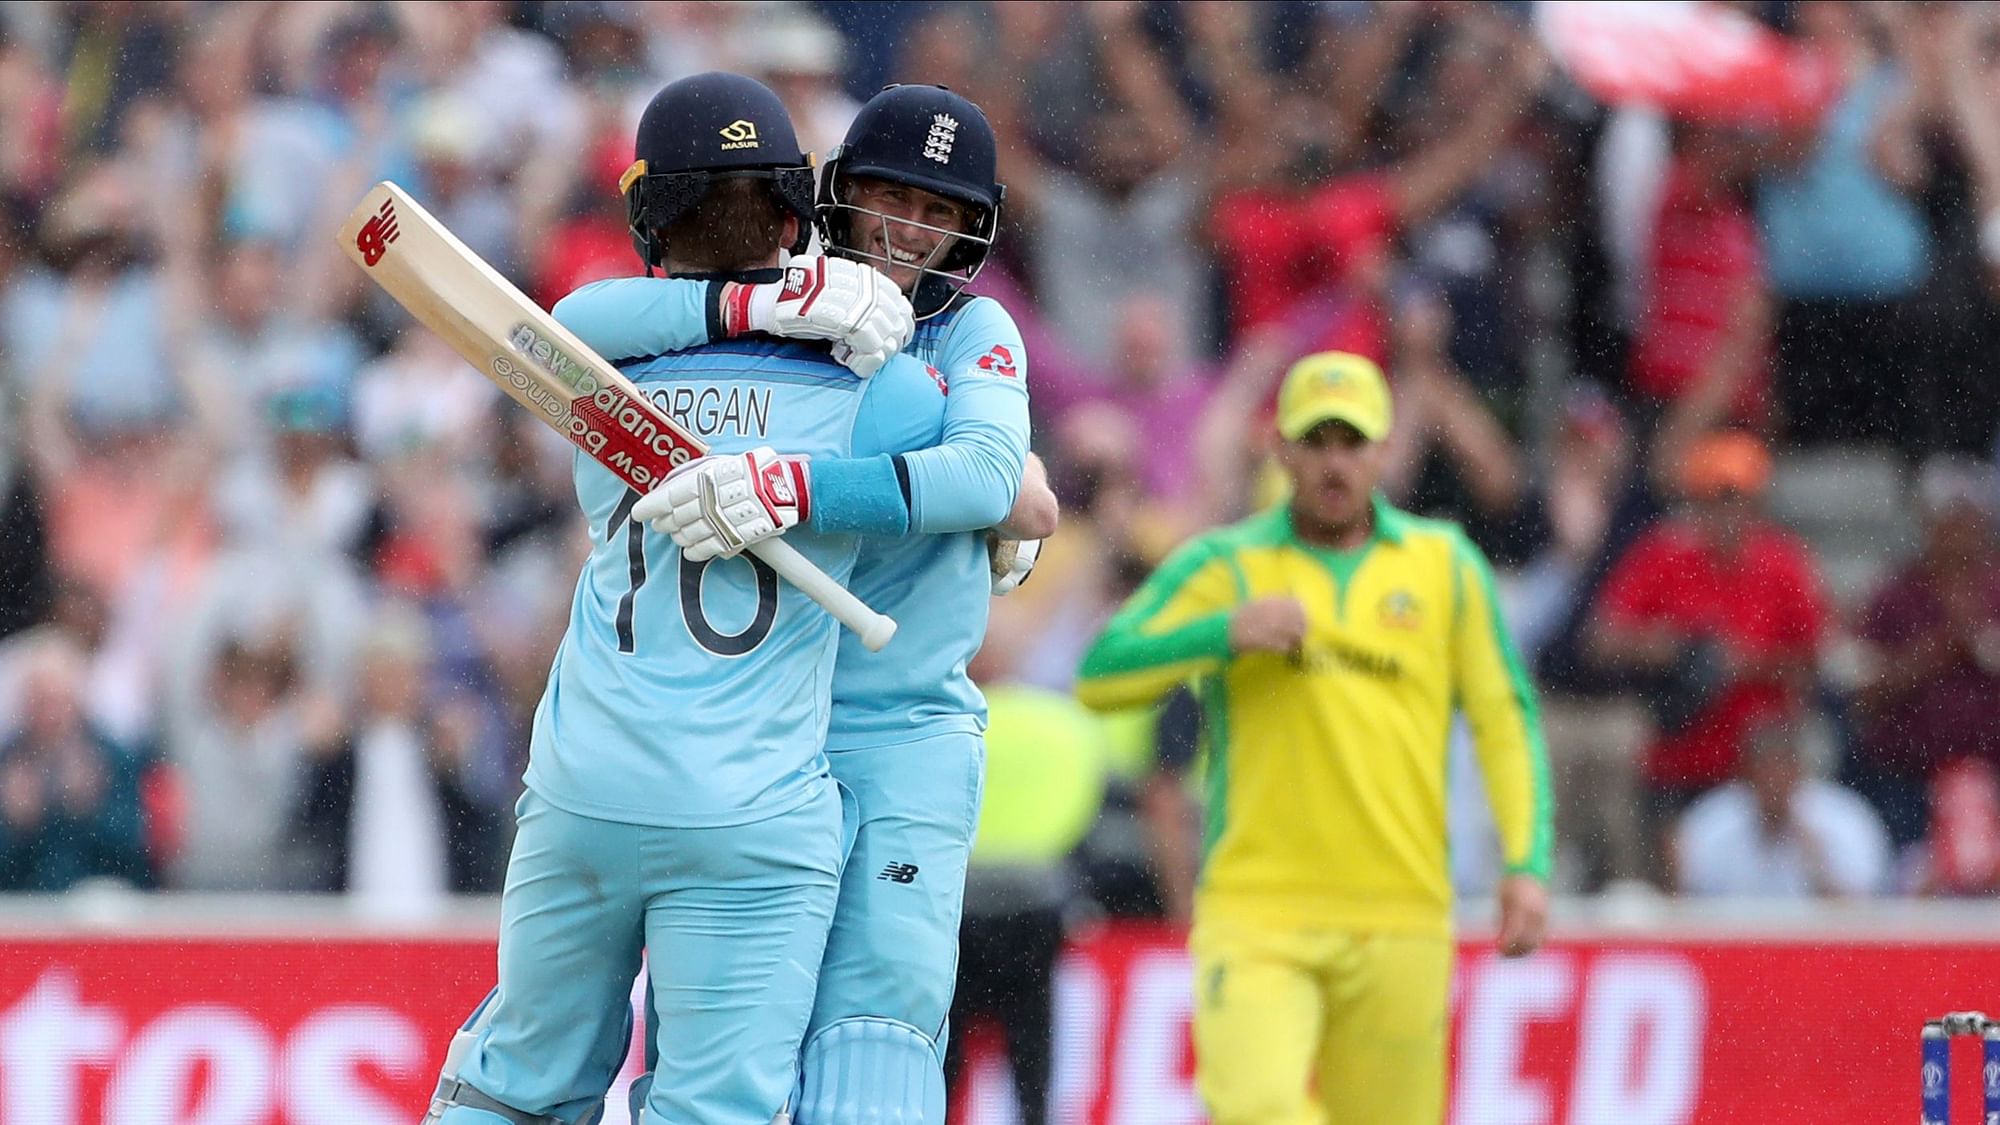 England won the ICC World Cup 2019, beating New Zealand in the one-over eliminator.